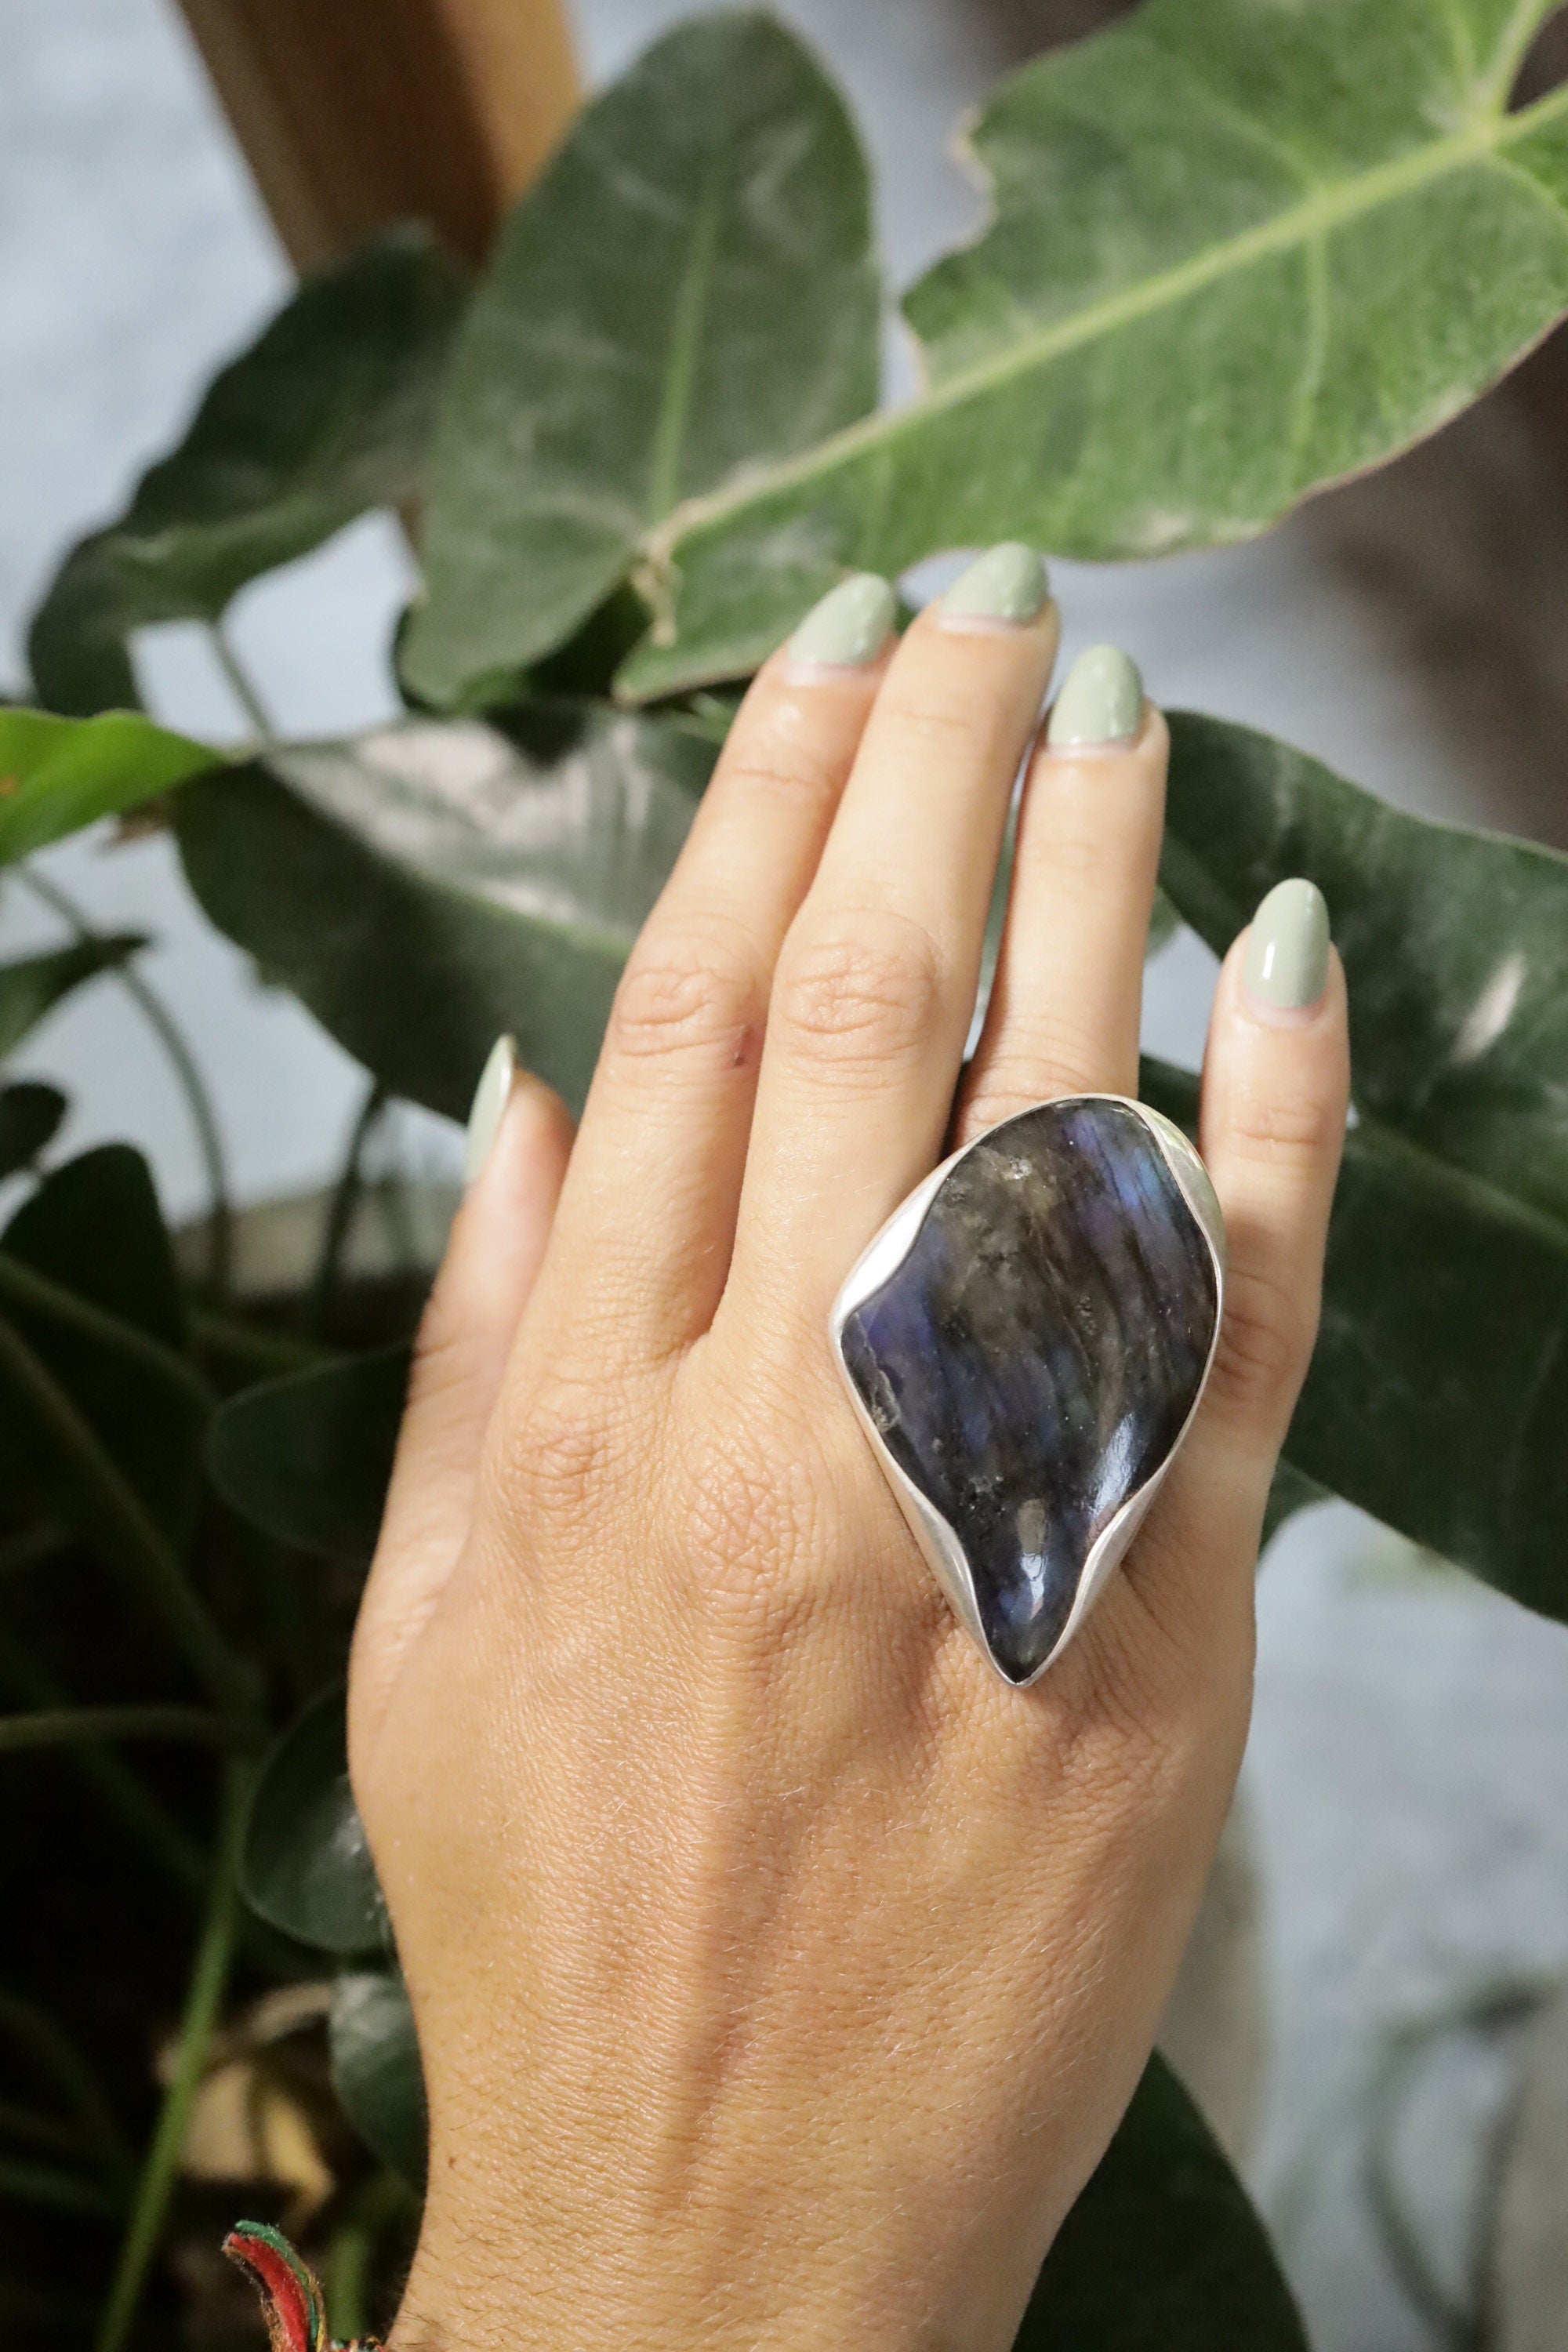 Sterling Silver Adjustable Ring Band, Large Tooth-Shaped Blue Labradorite, Size 5-12 US, Unisex, Spiritual Protection & Transformation